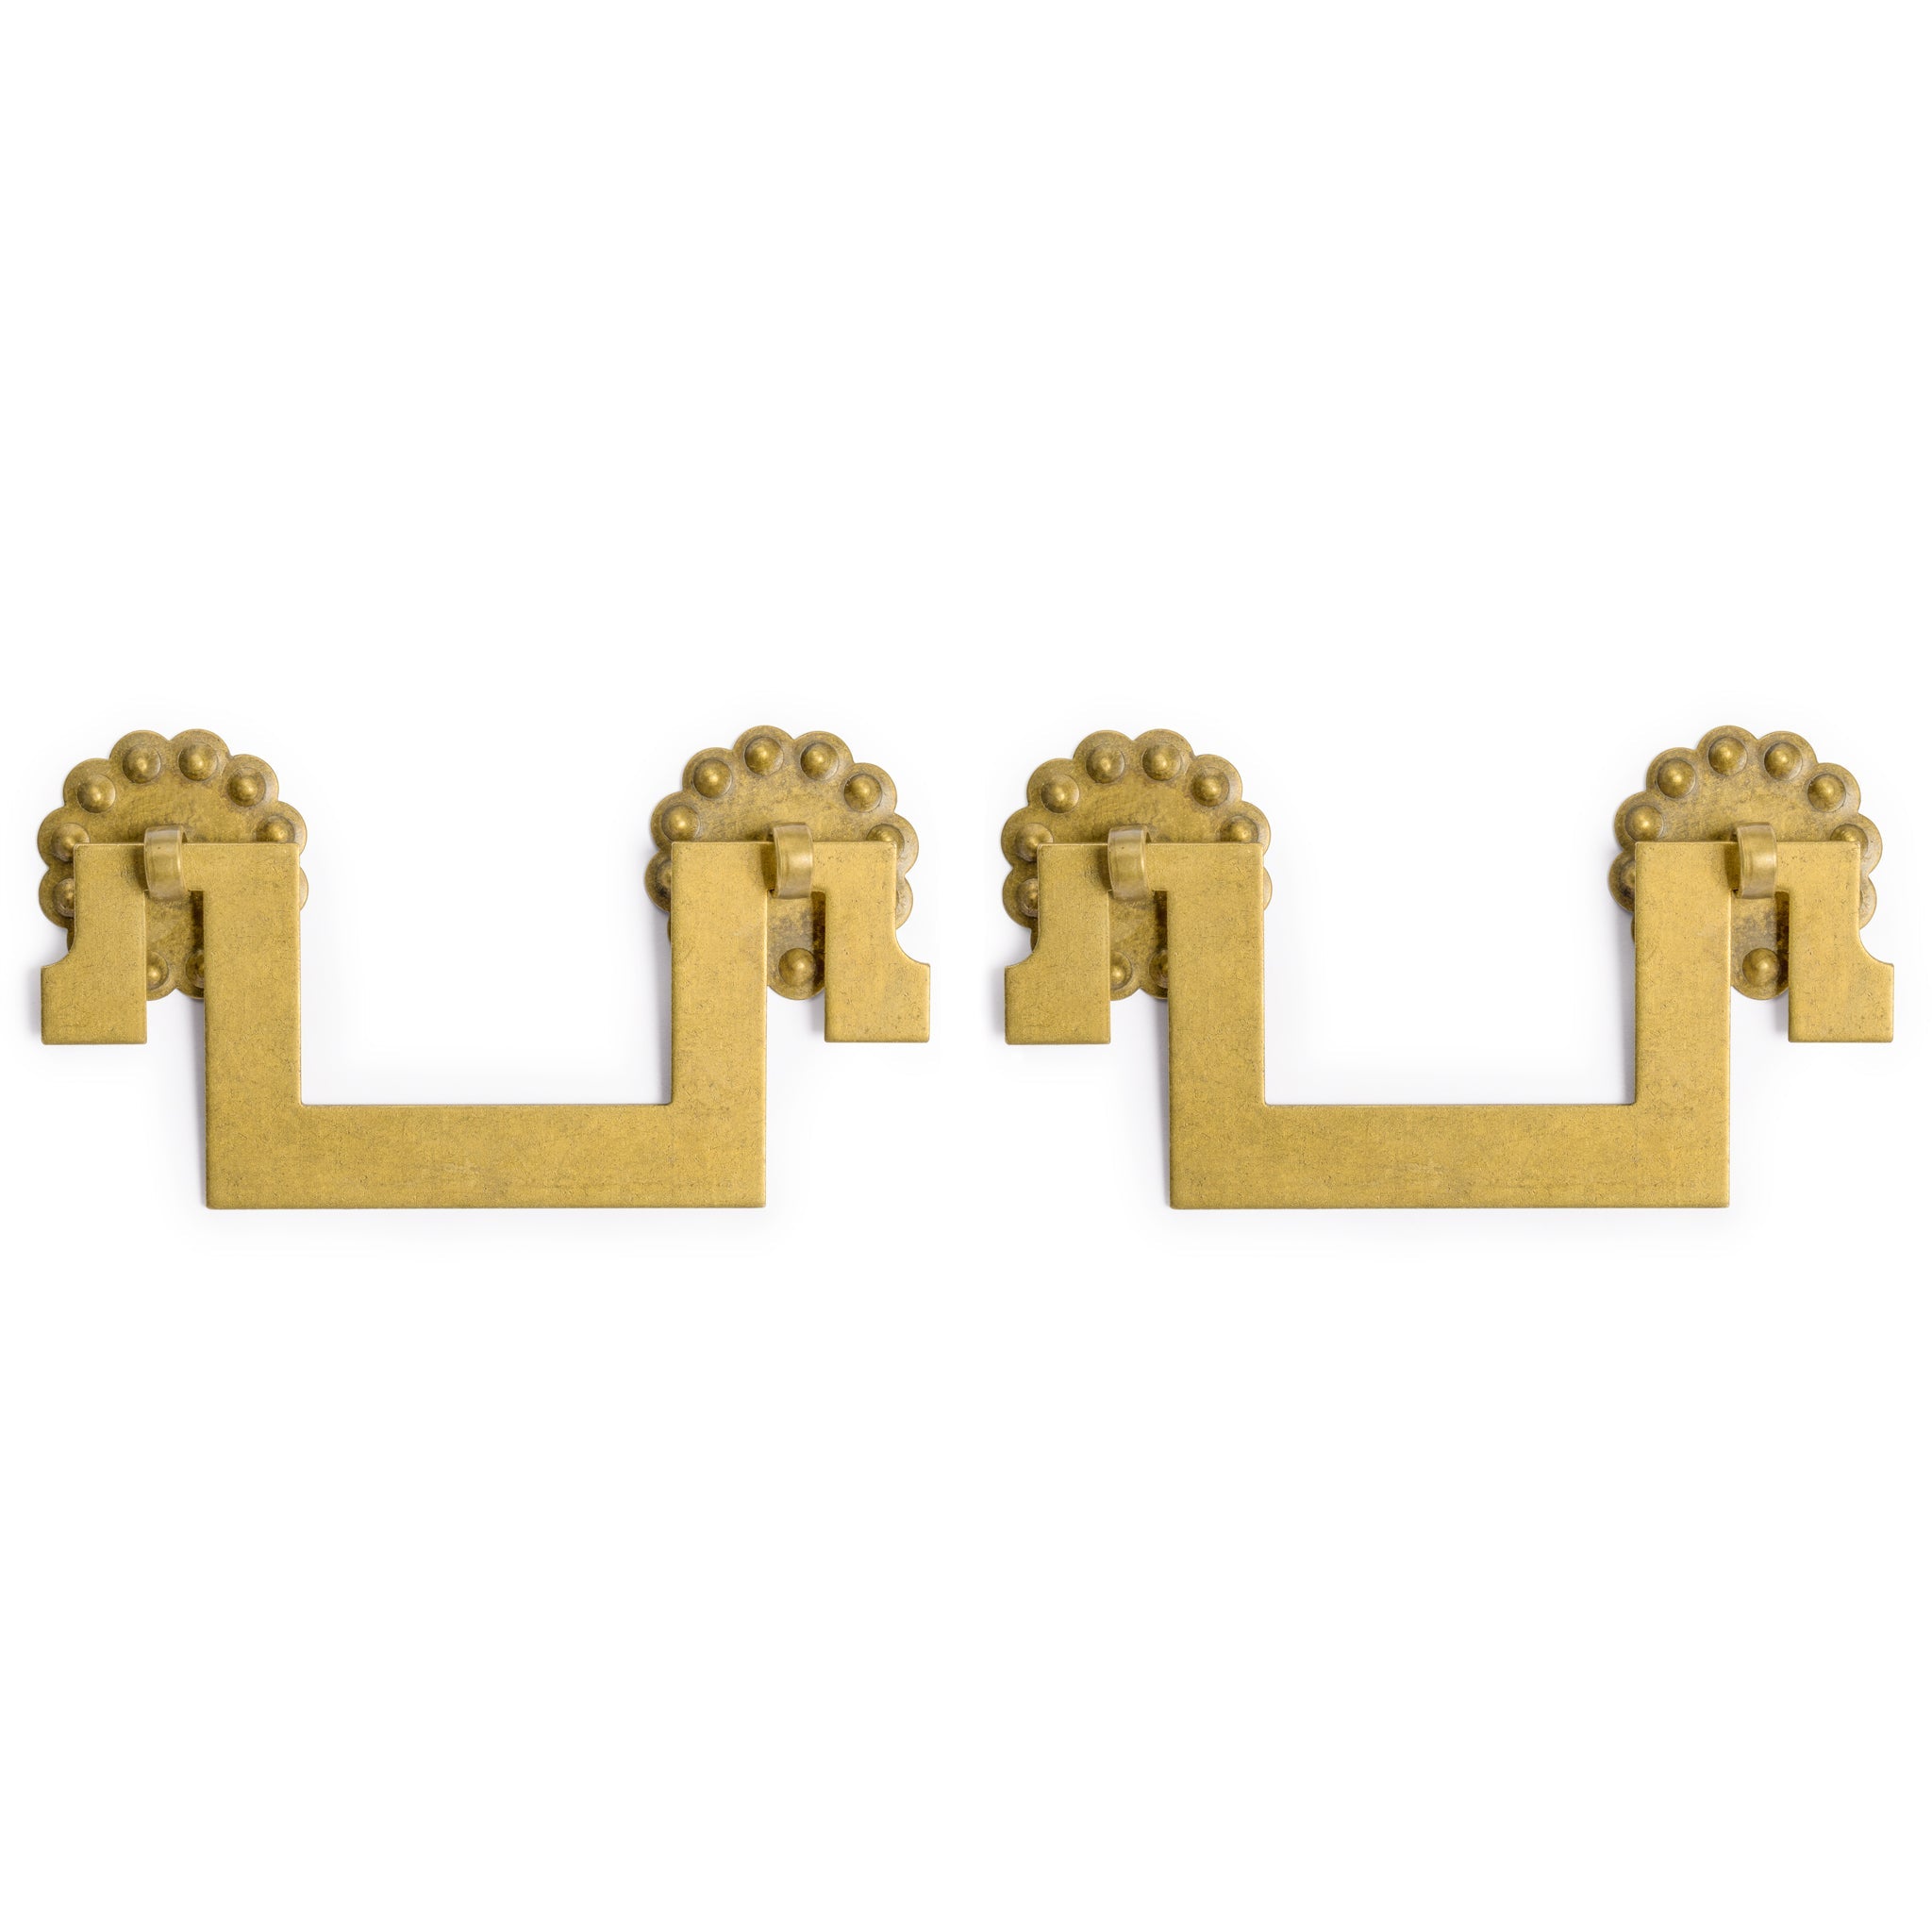 All Square Pulls 4" - Set of 2-Chinese Brass Hardware